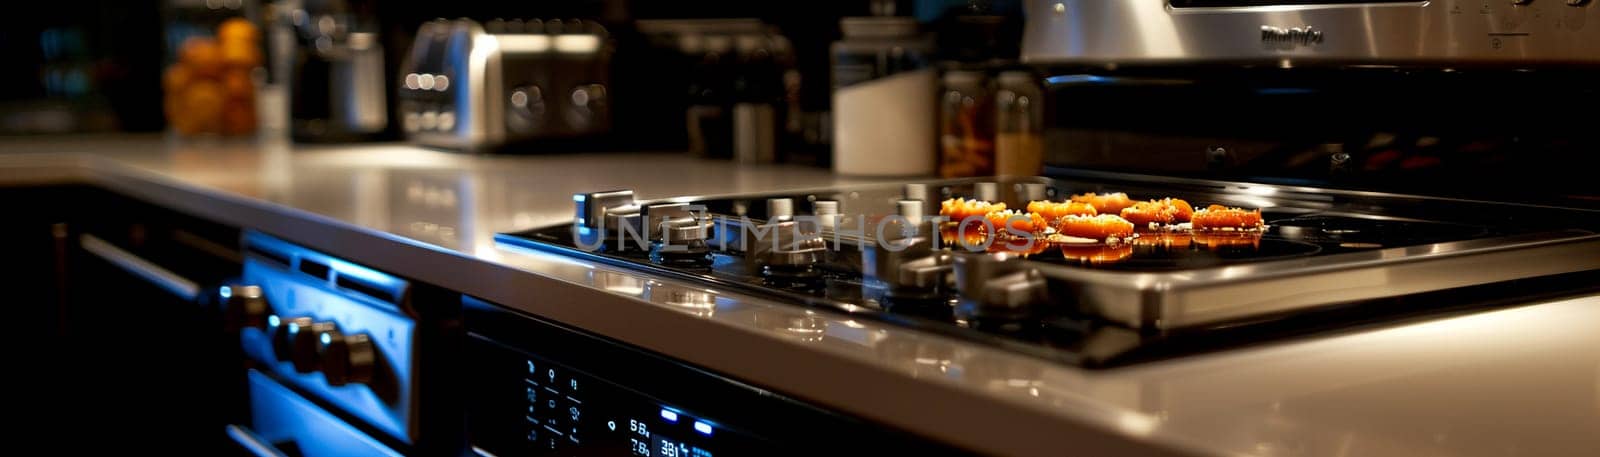 Futuristic smart home kitchen with voice-controlled appliances and interactive countertops